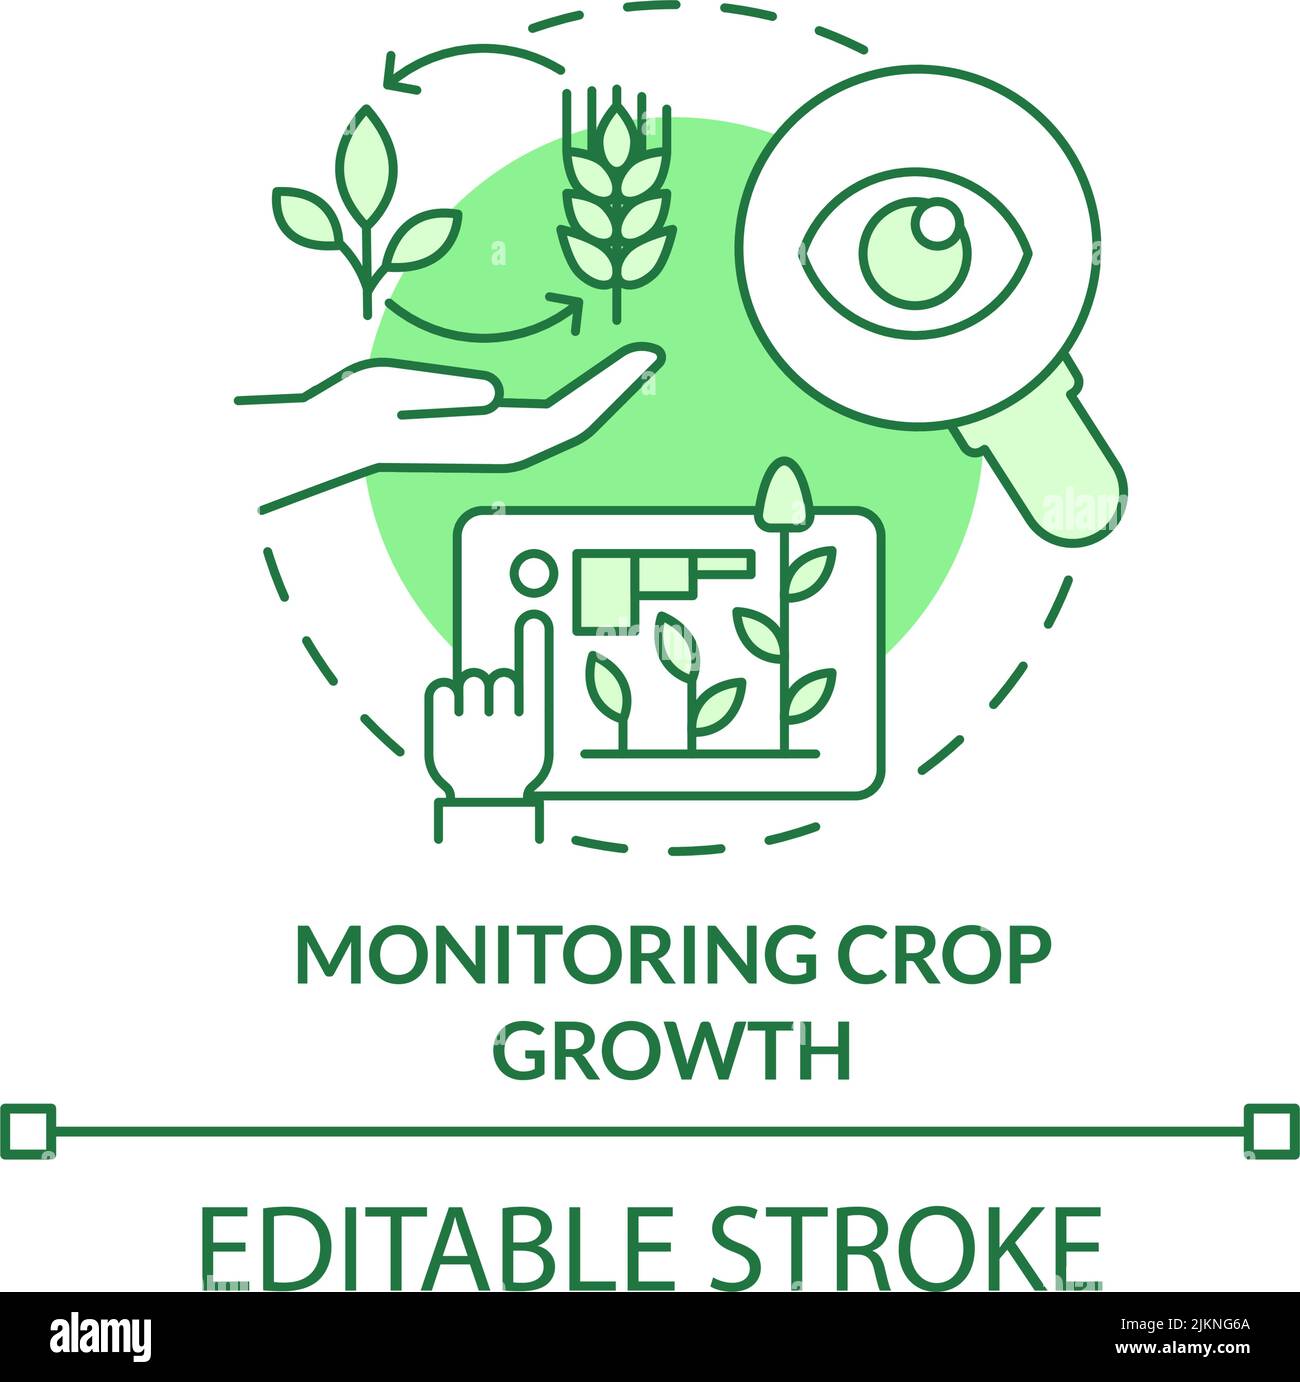 Monitoring crop growth green concept icon Stock Vector